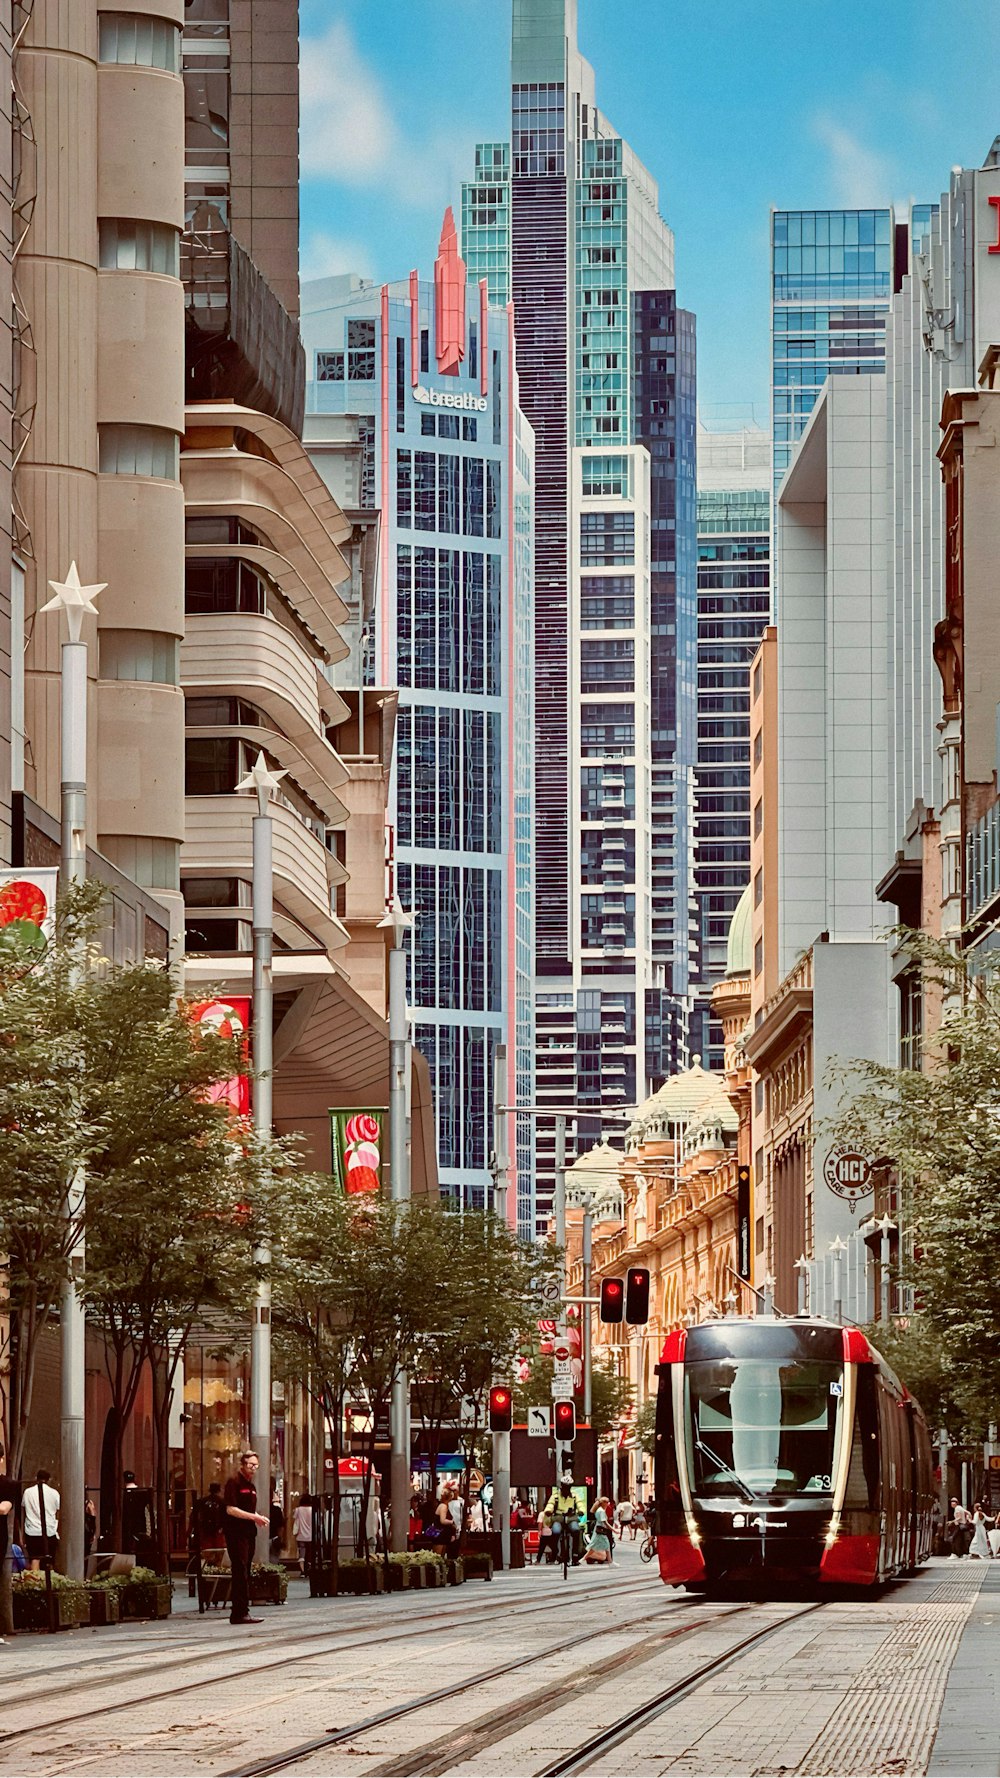 a trolley car on a city street with tall buildings in the background